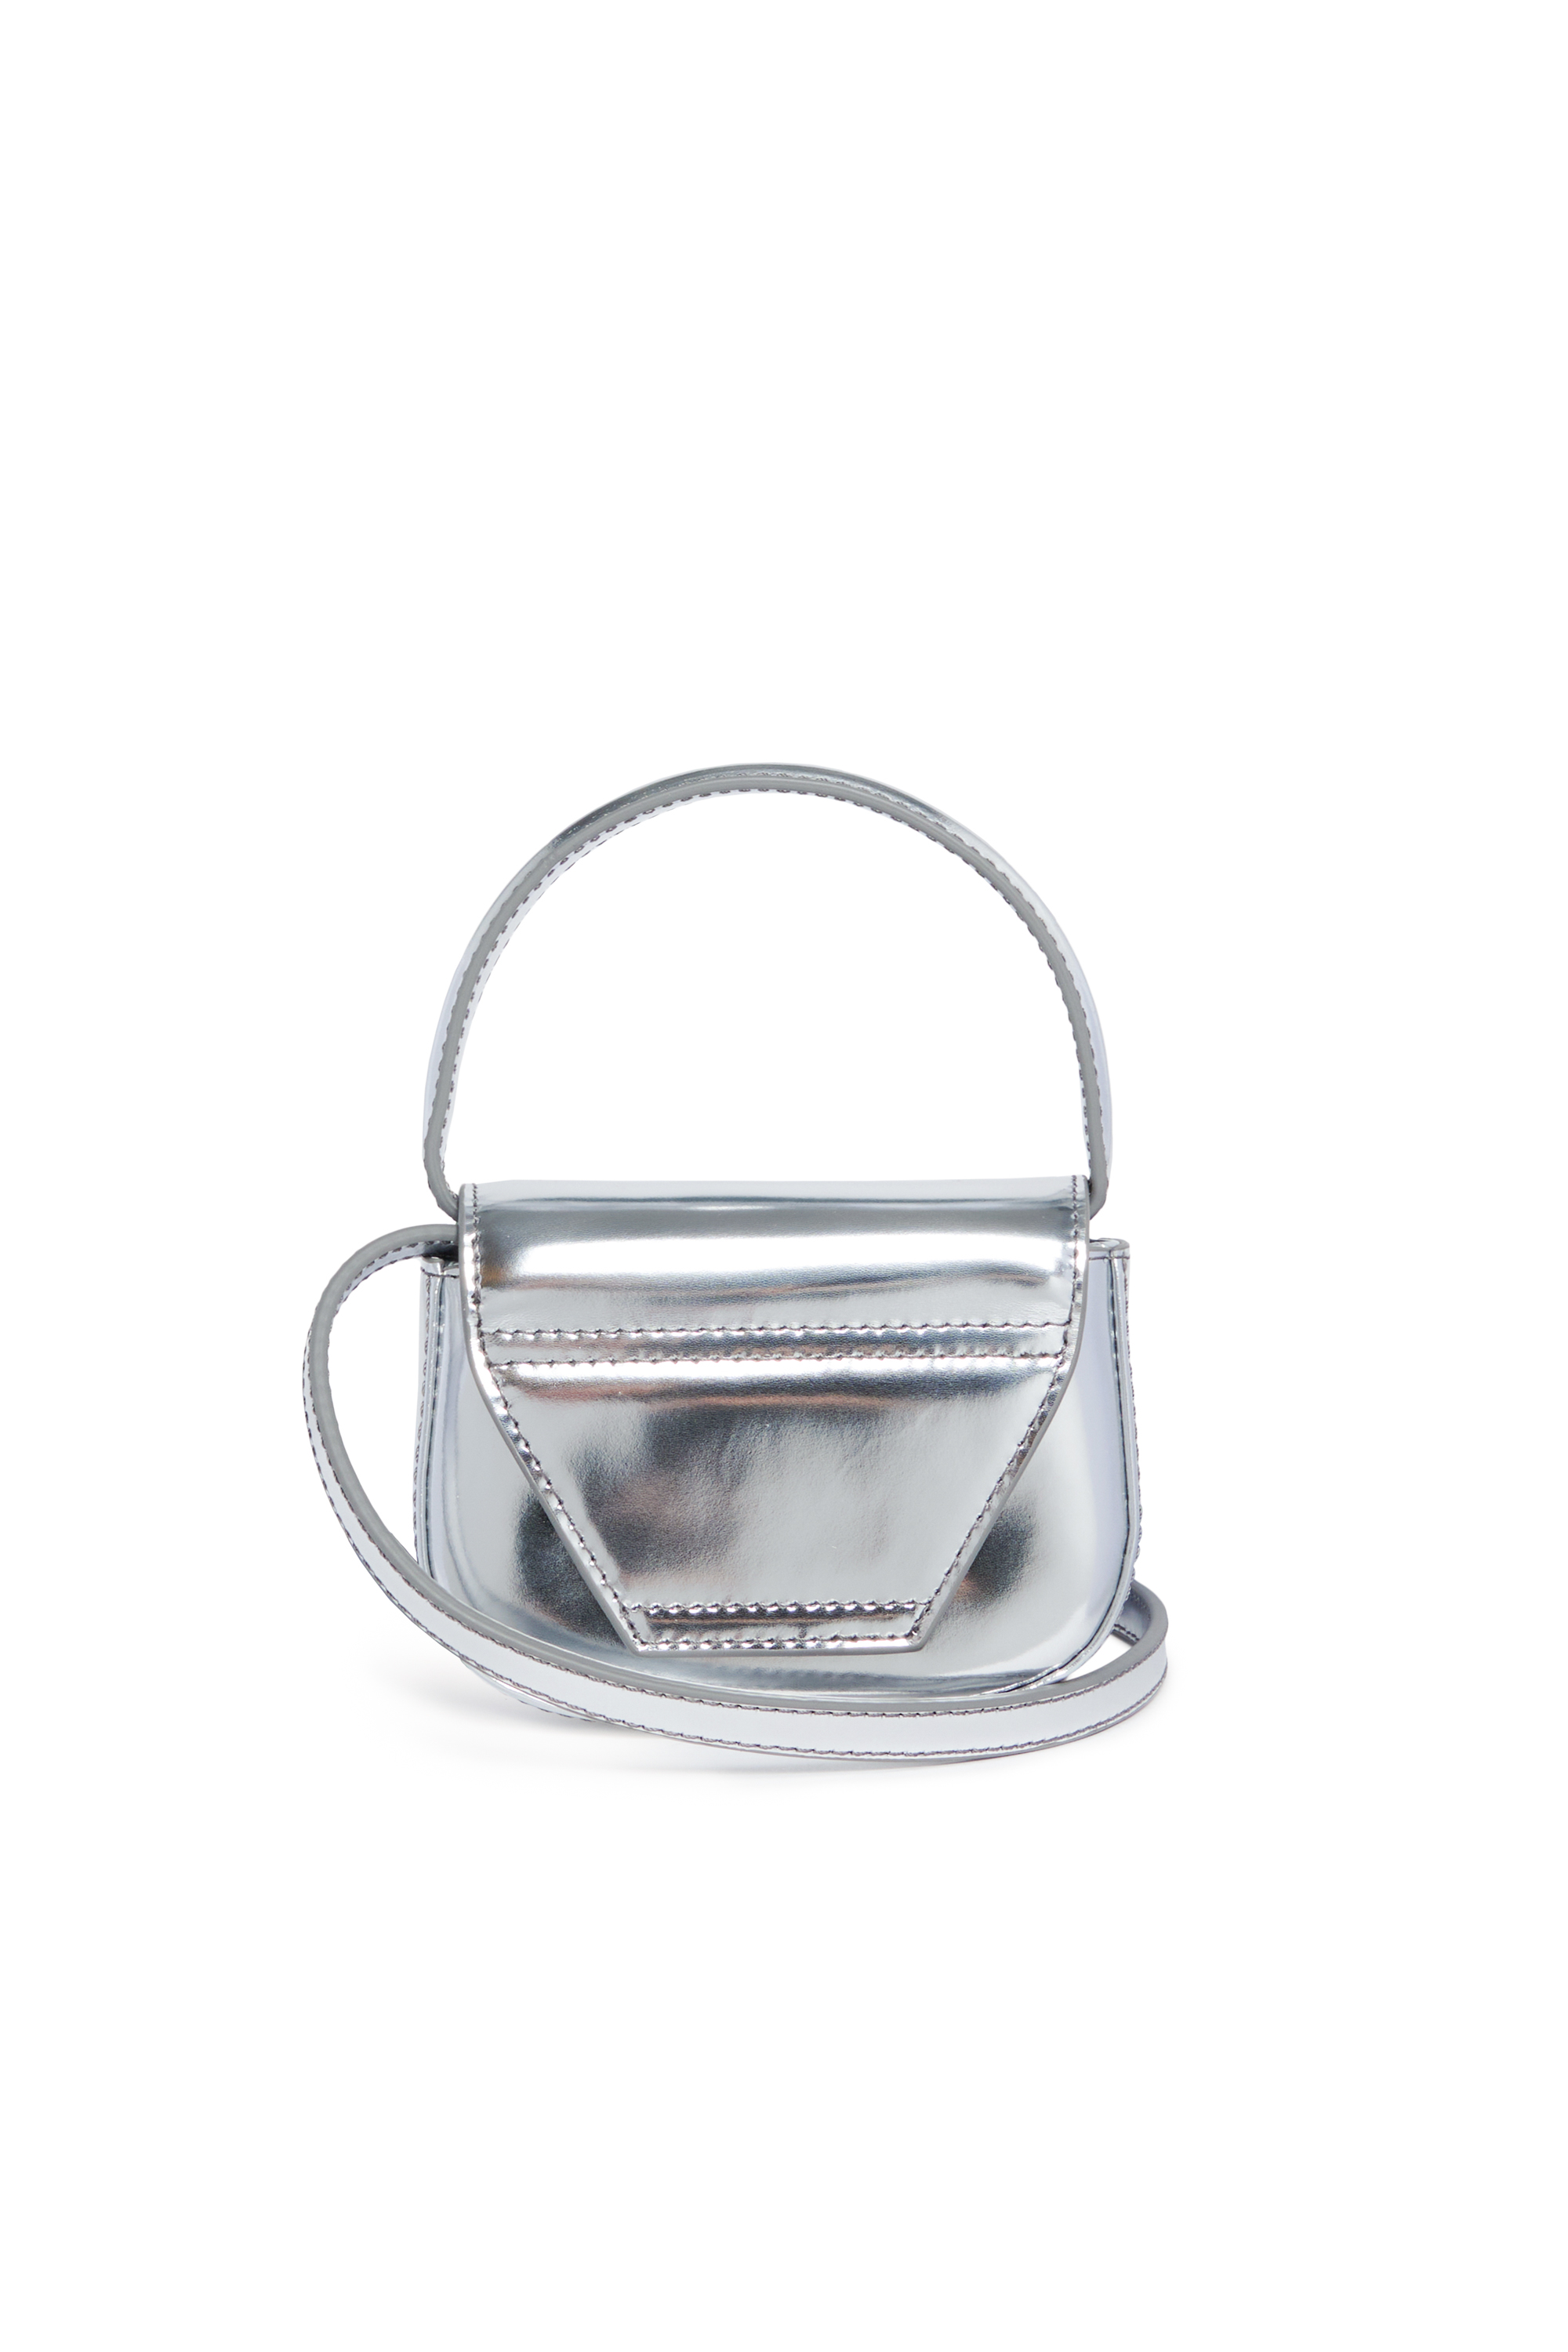 Diesel - 1DR XS, Woman Iconic mini bag in metallic leather in Silver - Image 2